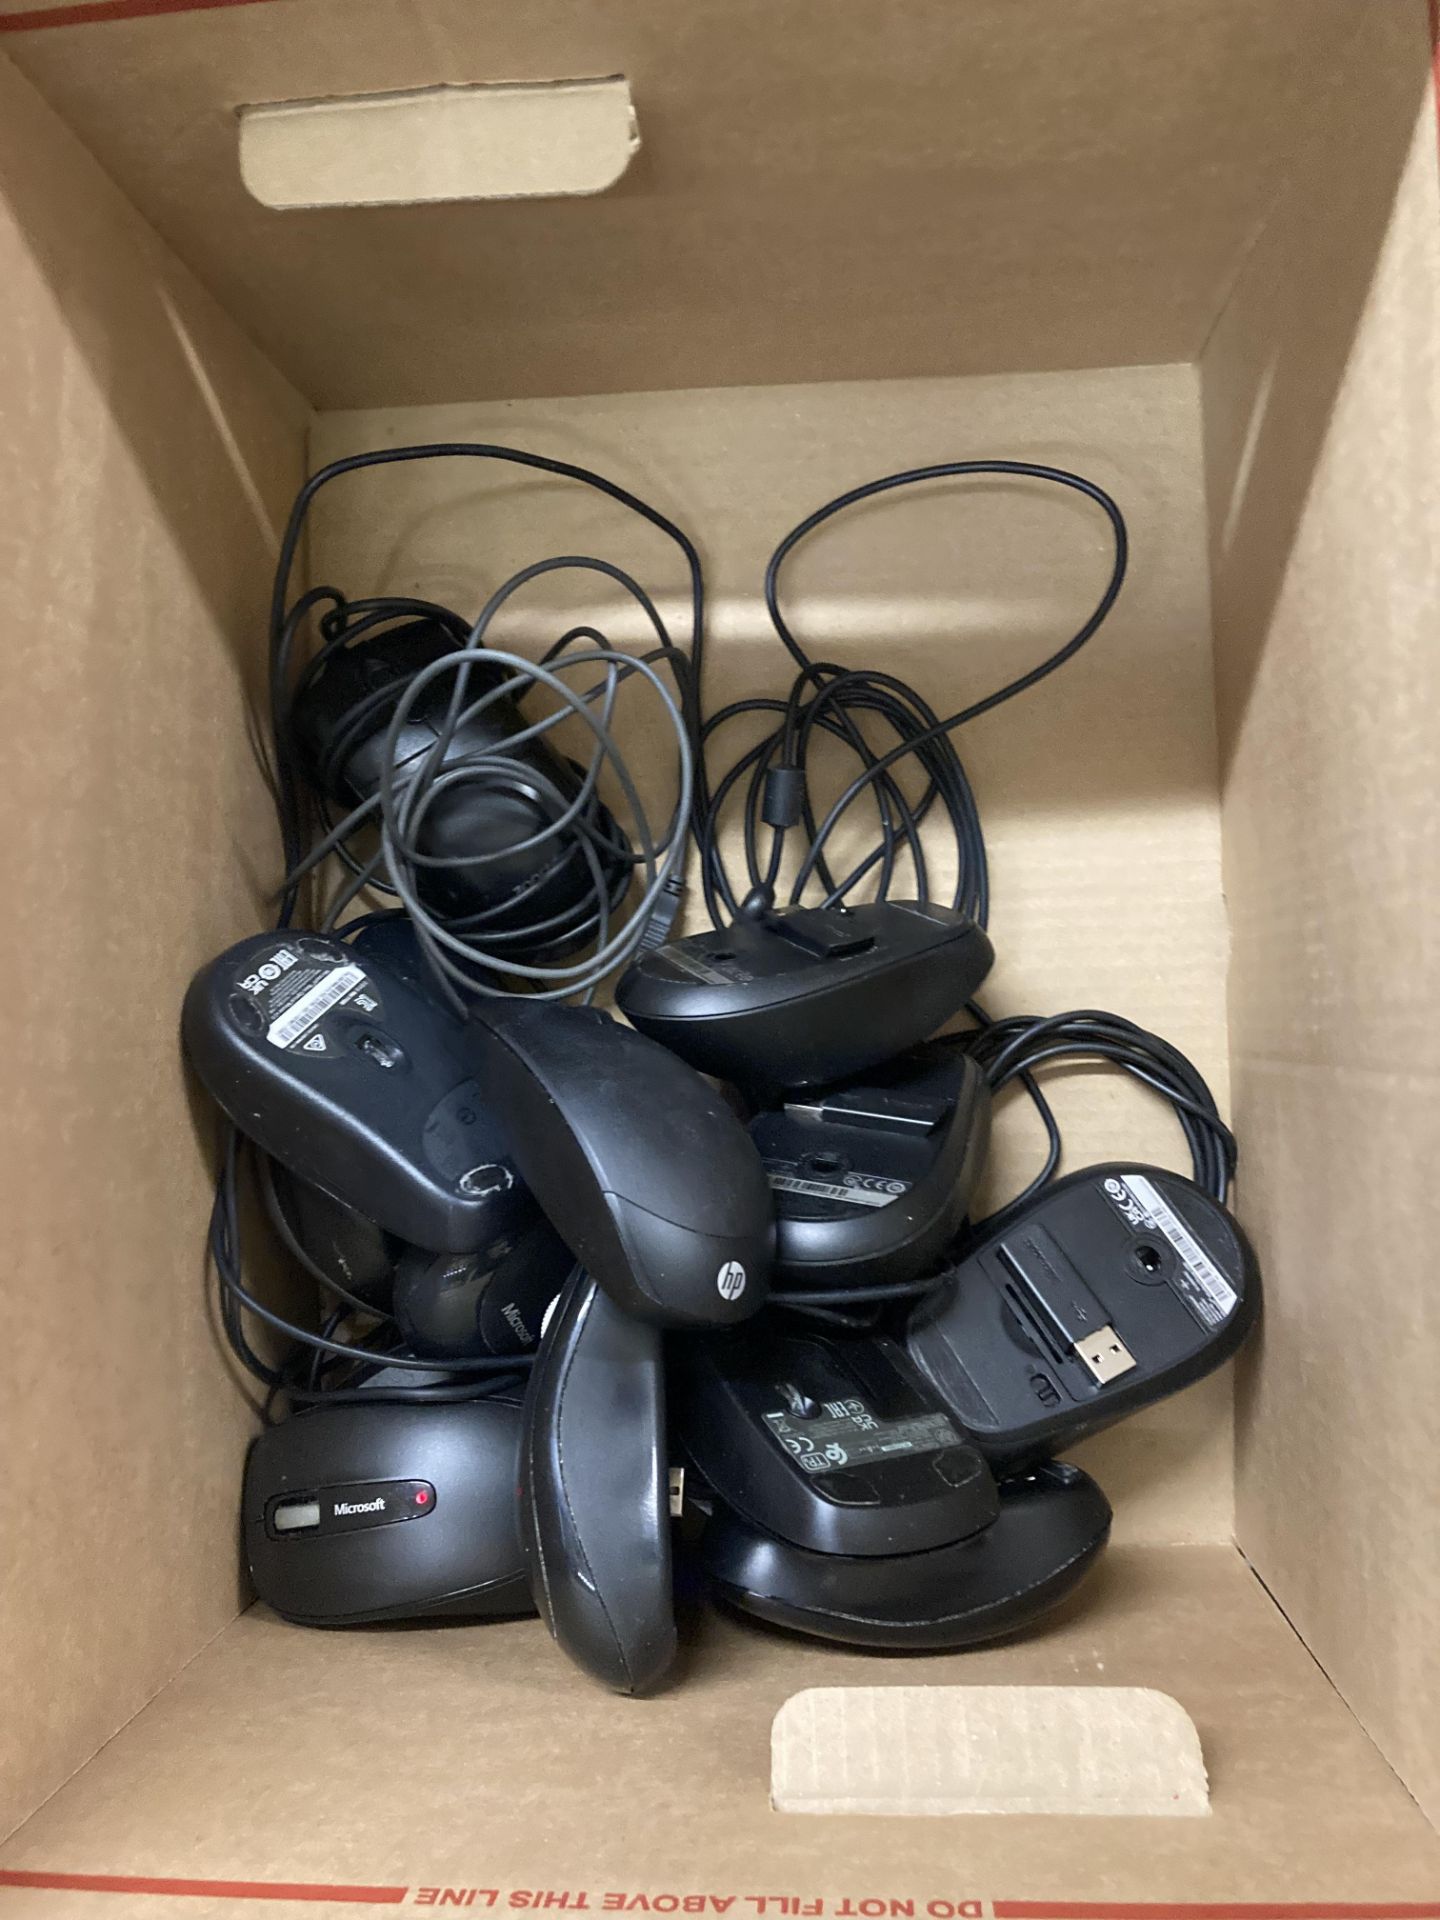 17 x assorted wireless and hard wired keyboards and 15 x wireless and hard wired mice (saleroom